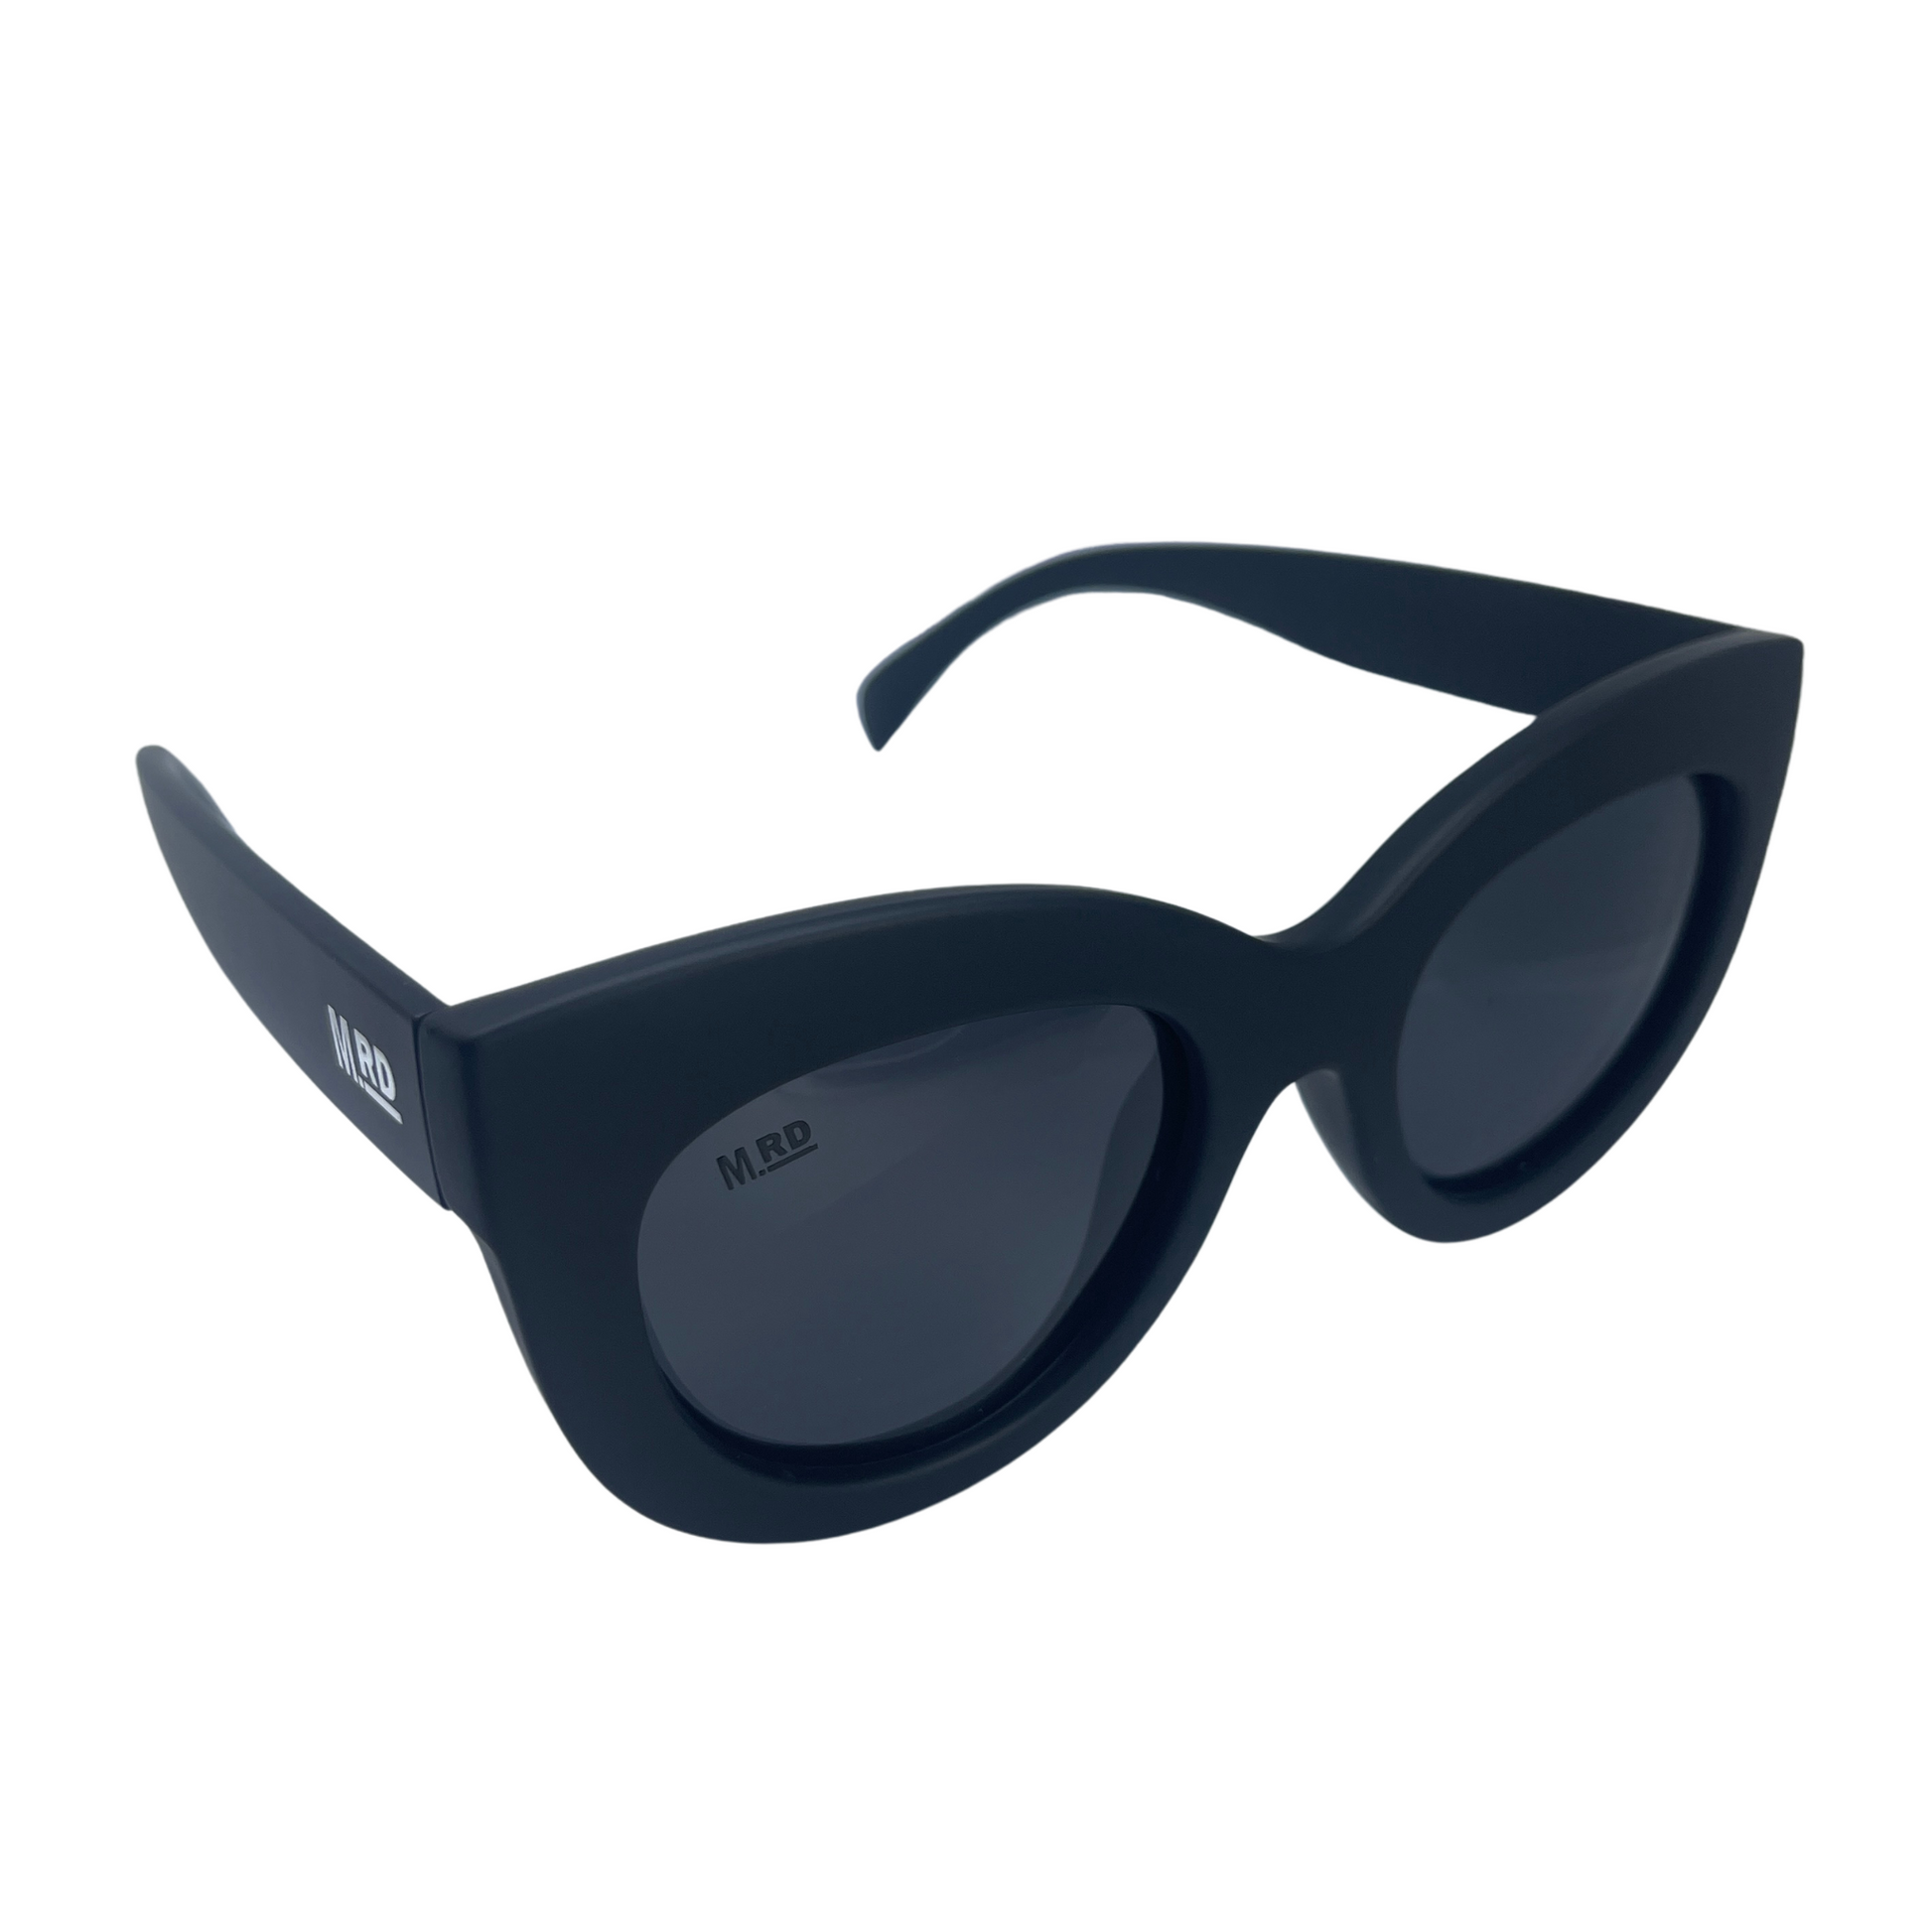 Womens sunglasses with Elizabeth Taylor style frames in black